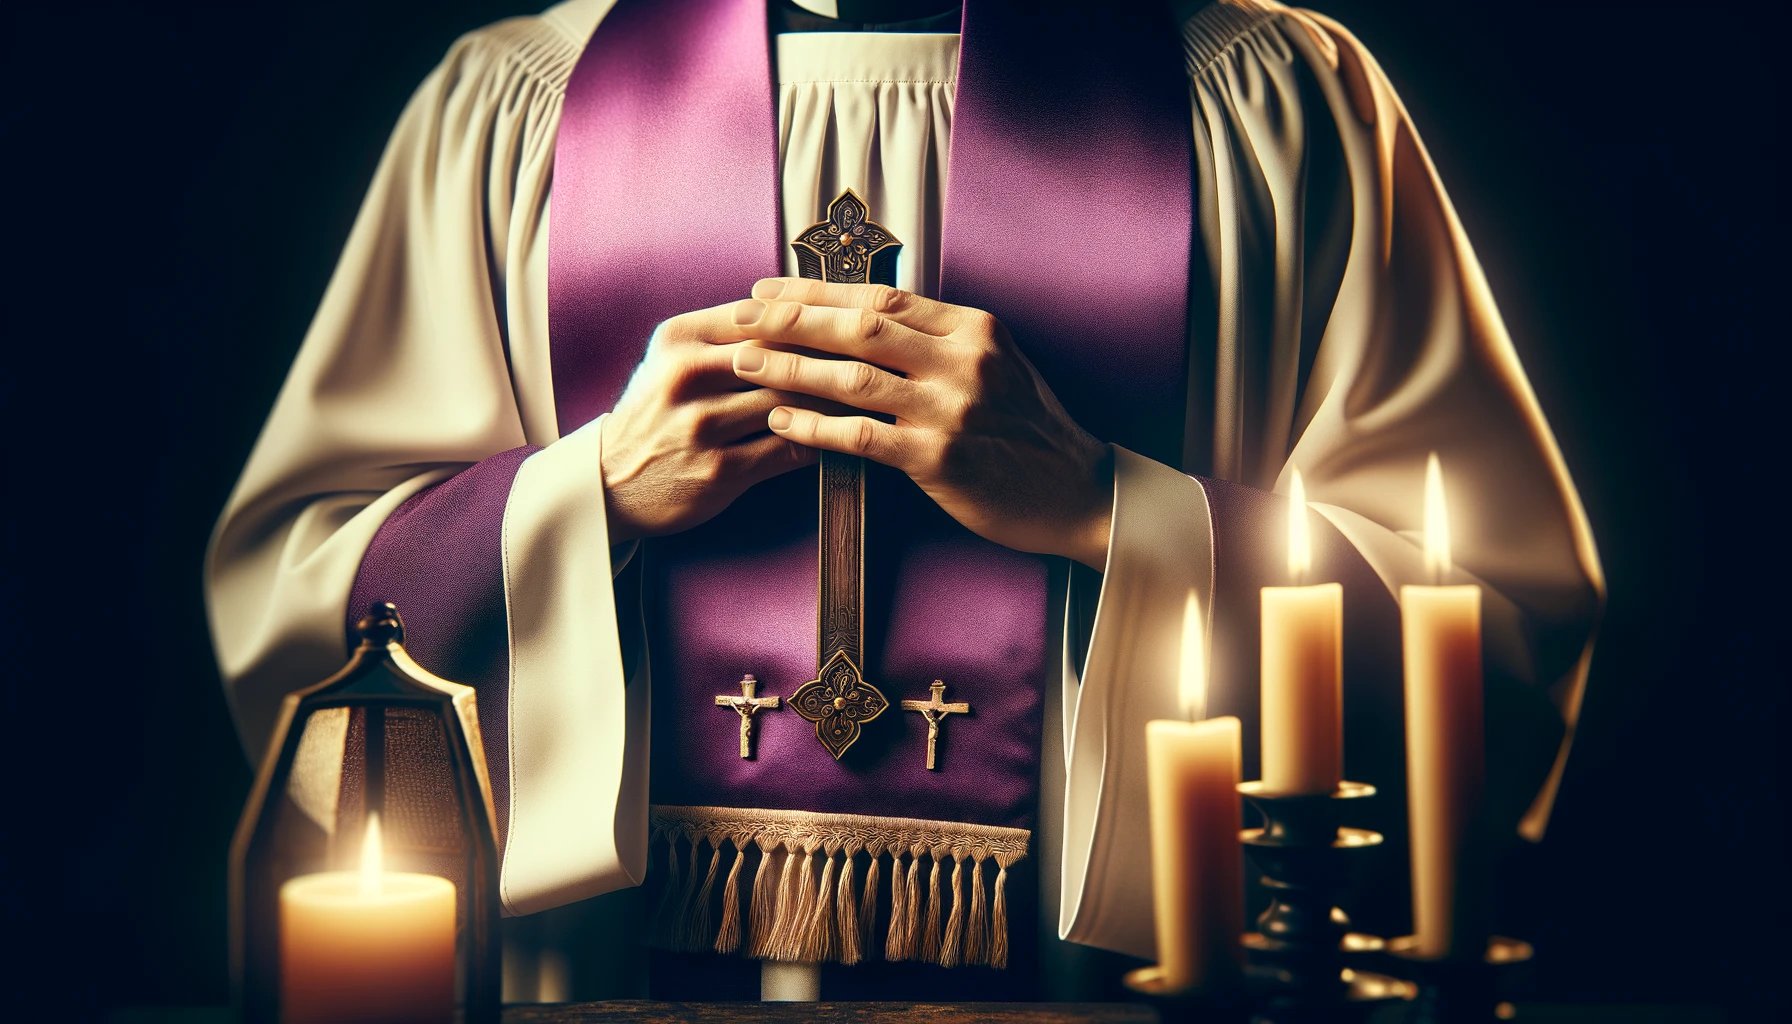 What Is The Liturgical Color During Lent?